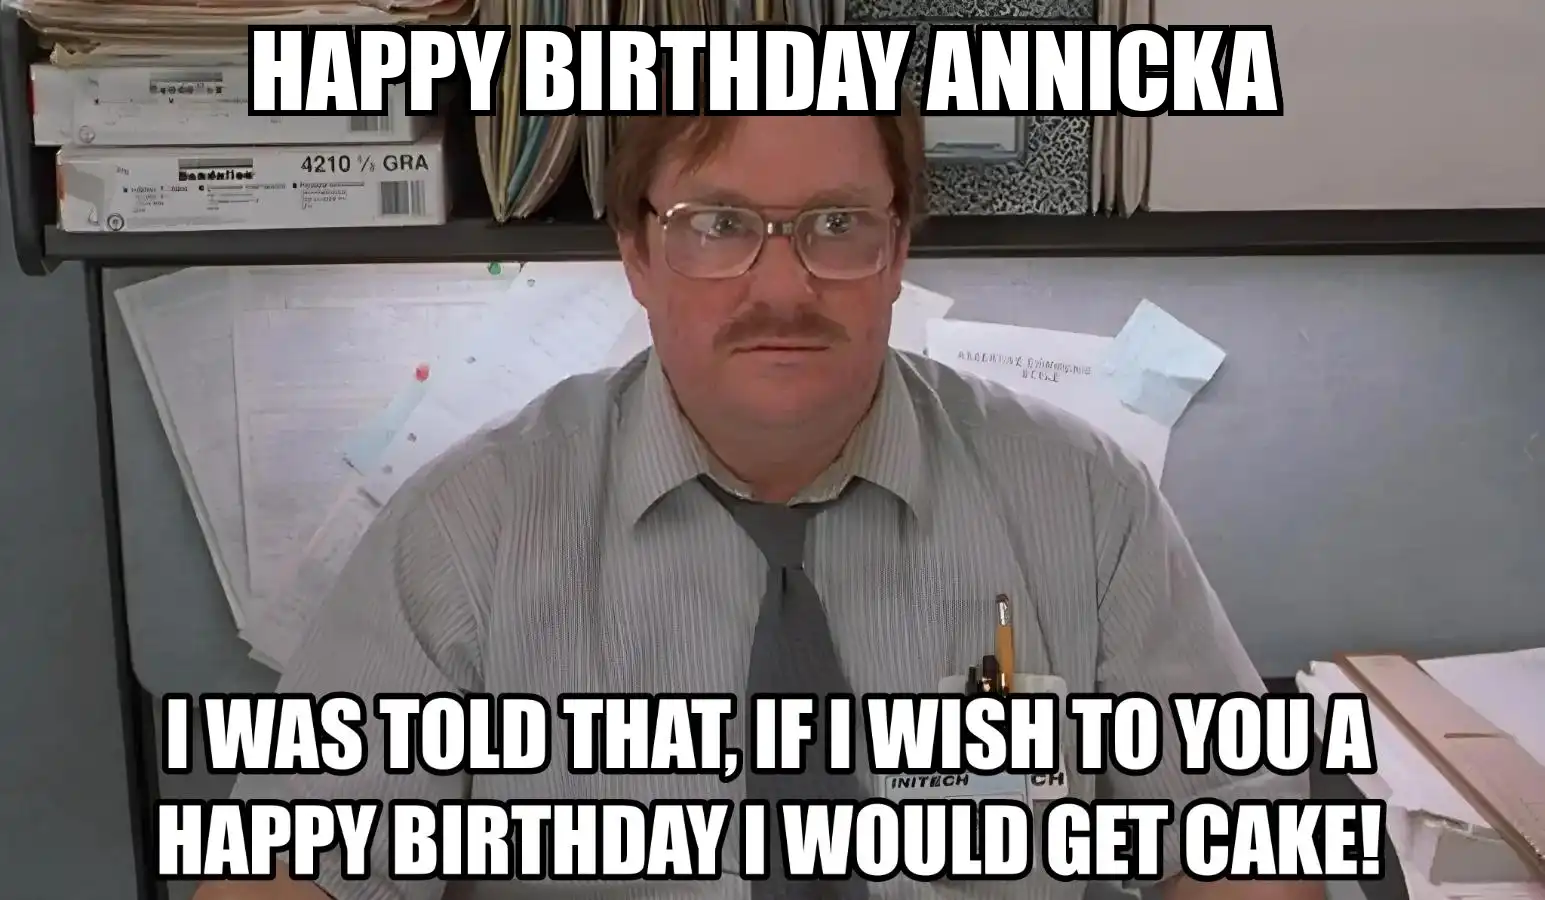 Happy Birthday Annicka I Would Get A Cake Meme